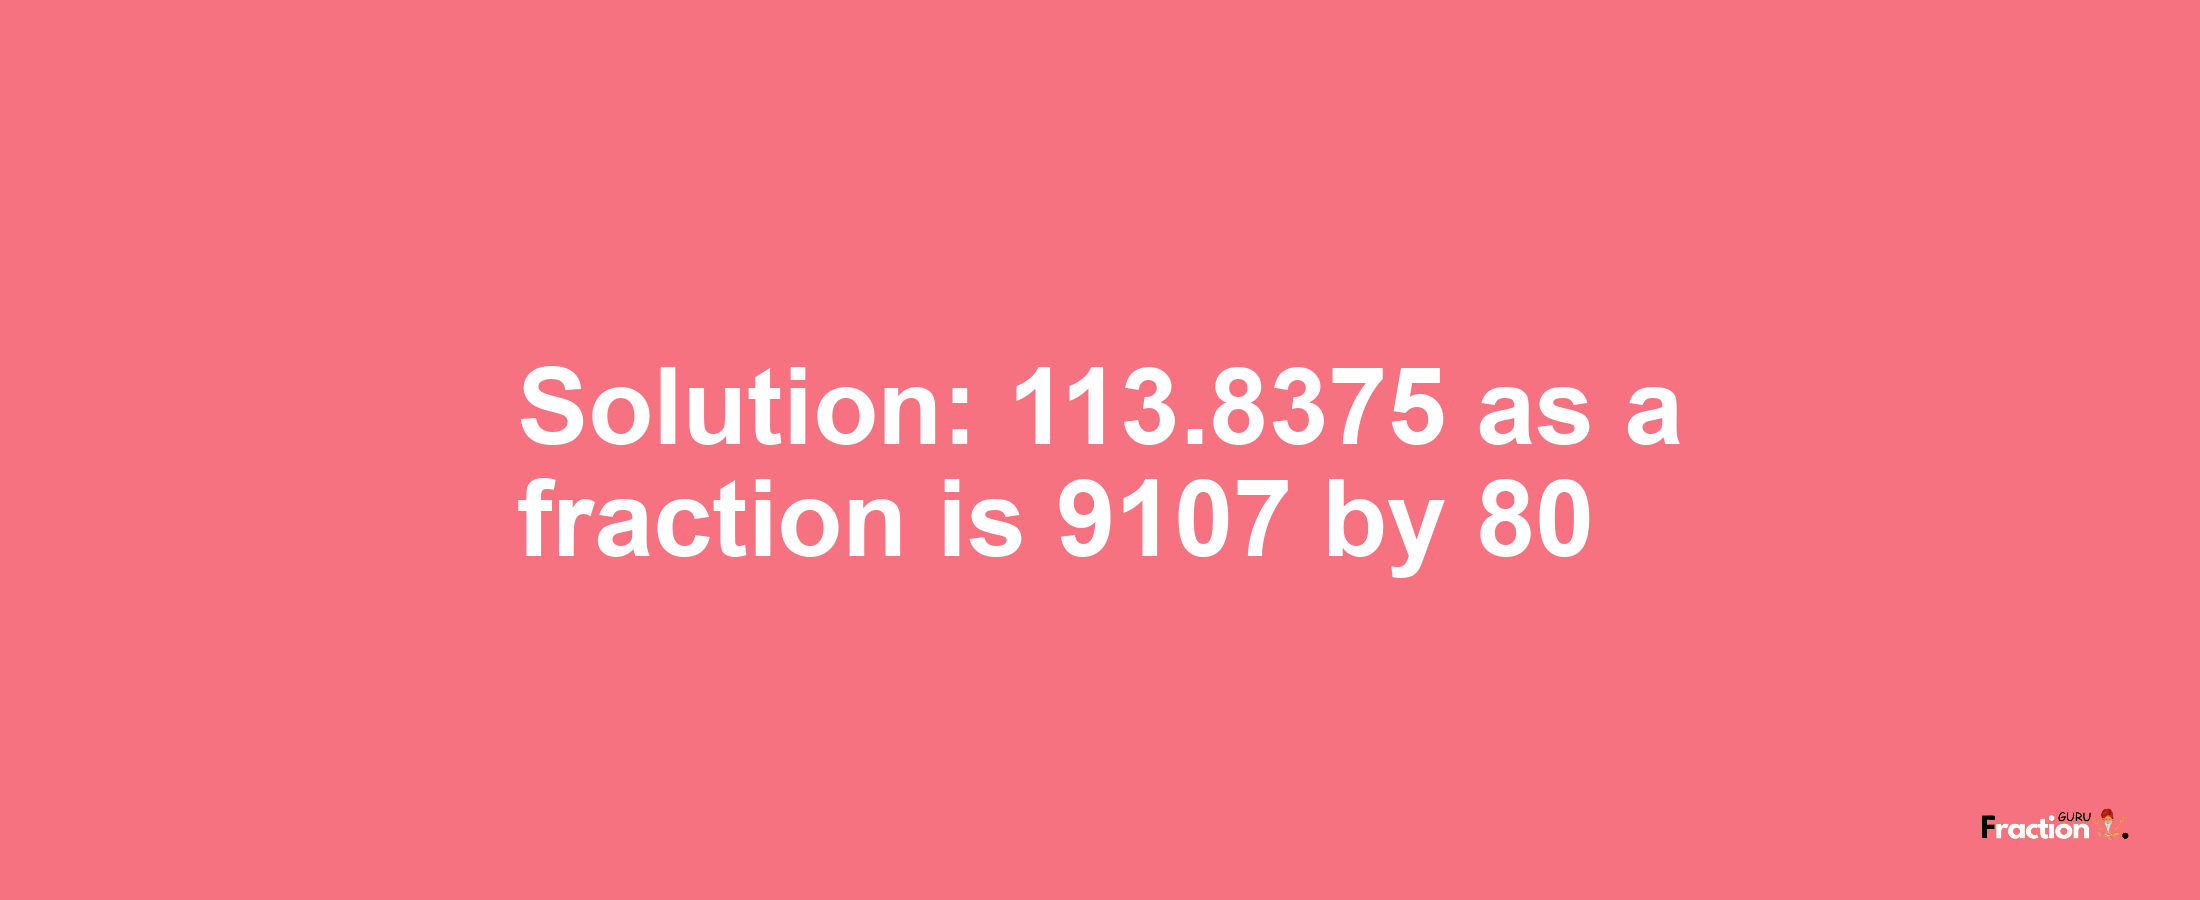 Solution:113.8375 as a fraction is 9107/80